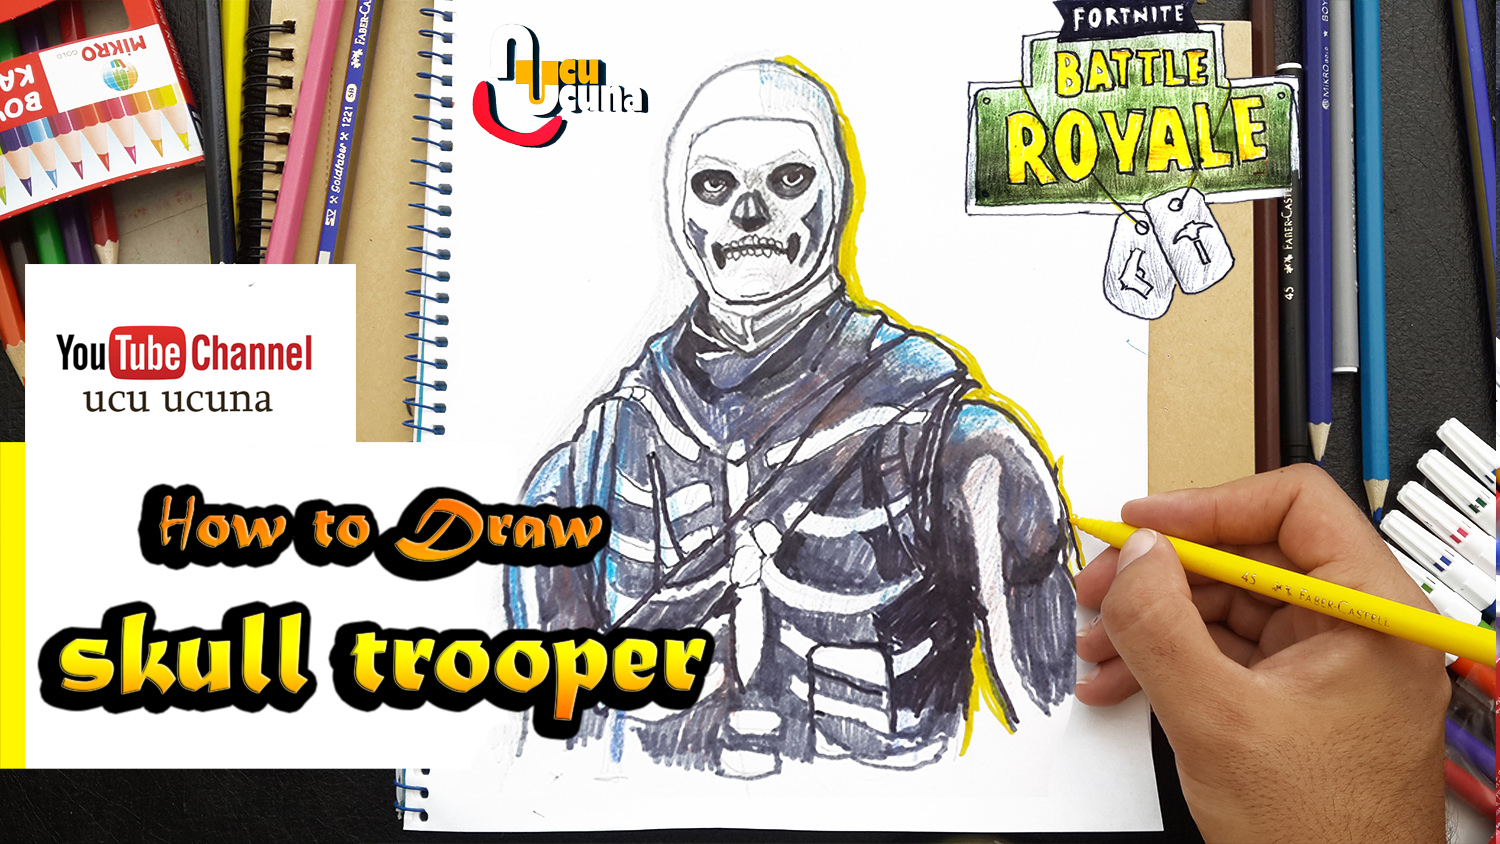 How to draw skulltrooper tutorial youtube channel name is ucu ucuna learn how to draw skull trooper from fortnite step by step beginner drawing tutorial of the skull trooper skin from fortnite